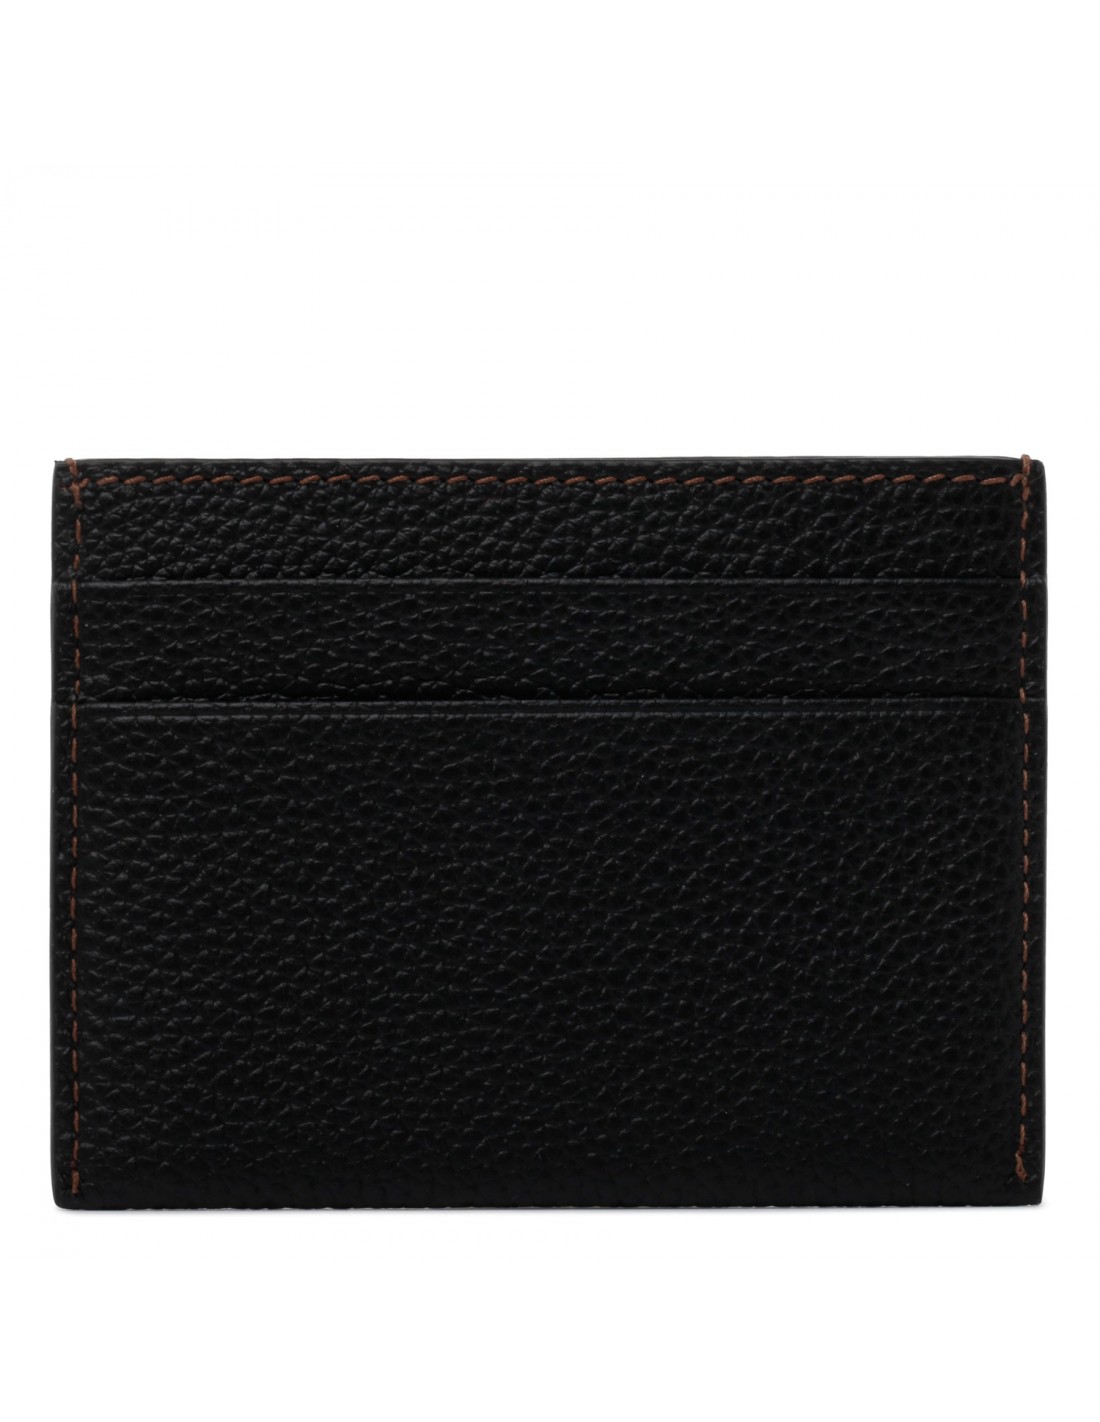 TB black grained leather card case